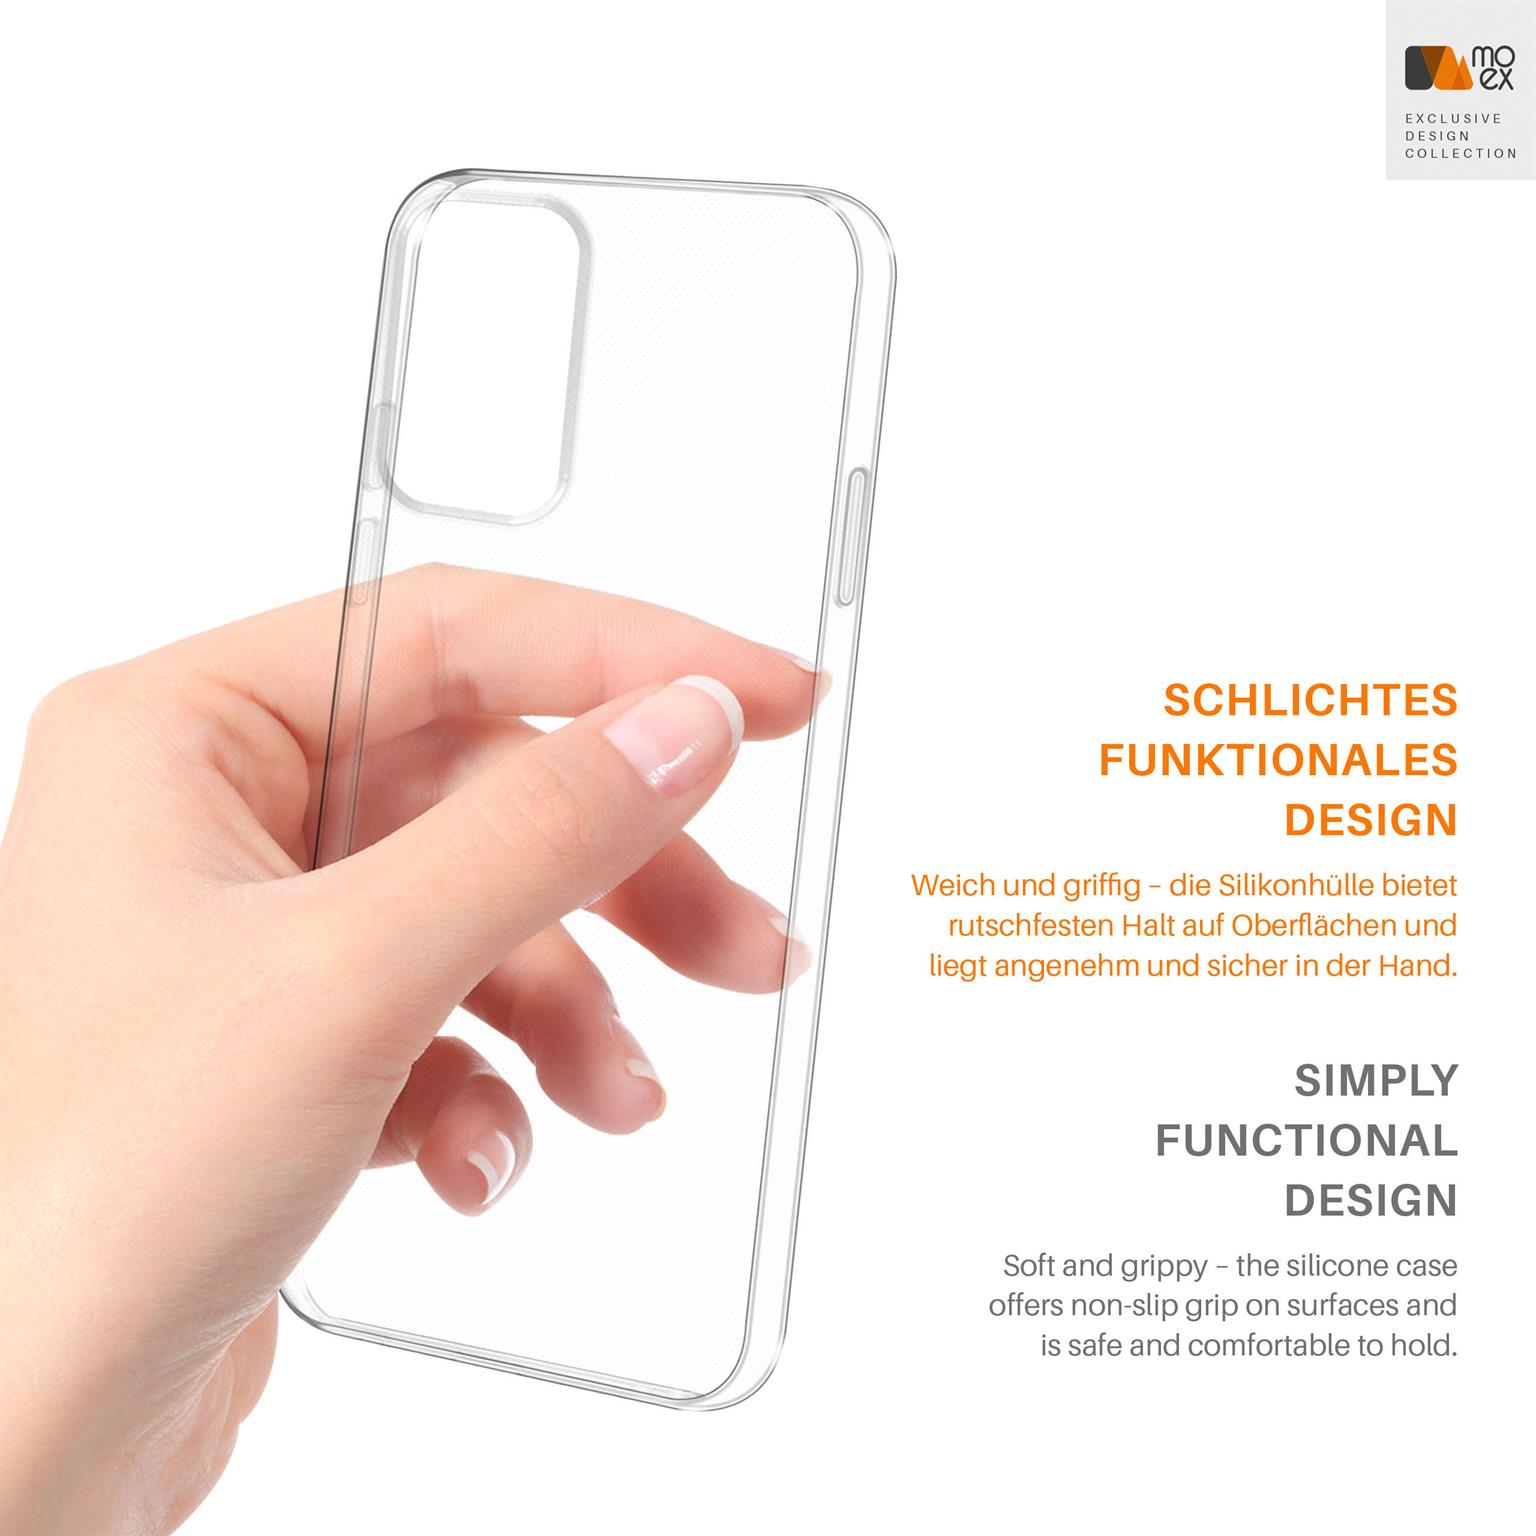 Case, Backcover, 8T, Crystal-Clear OnePlus, Aero MOEX